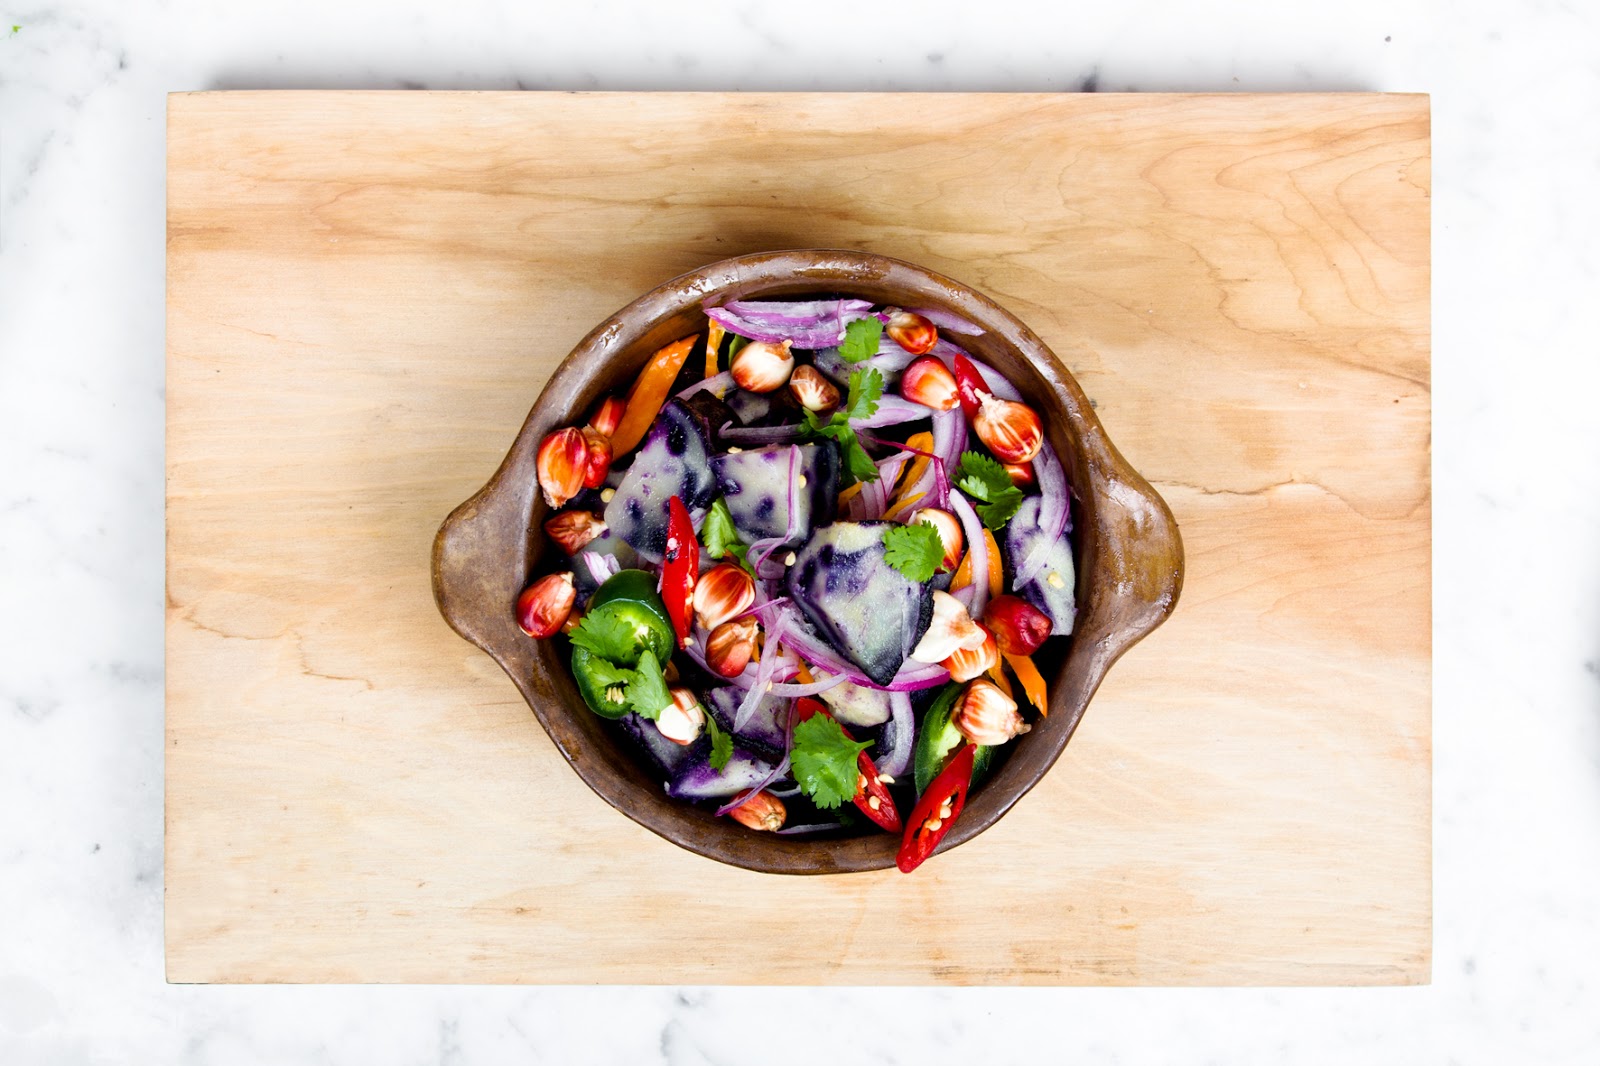 Purple Potato Salad with Roasted Grape Tomatoes Sweet and Hot Peppers